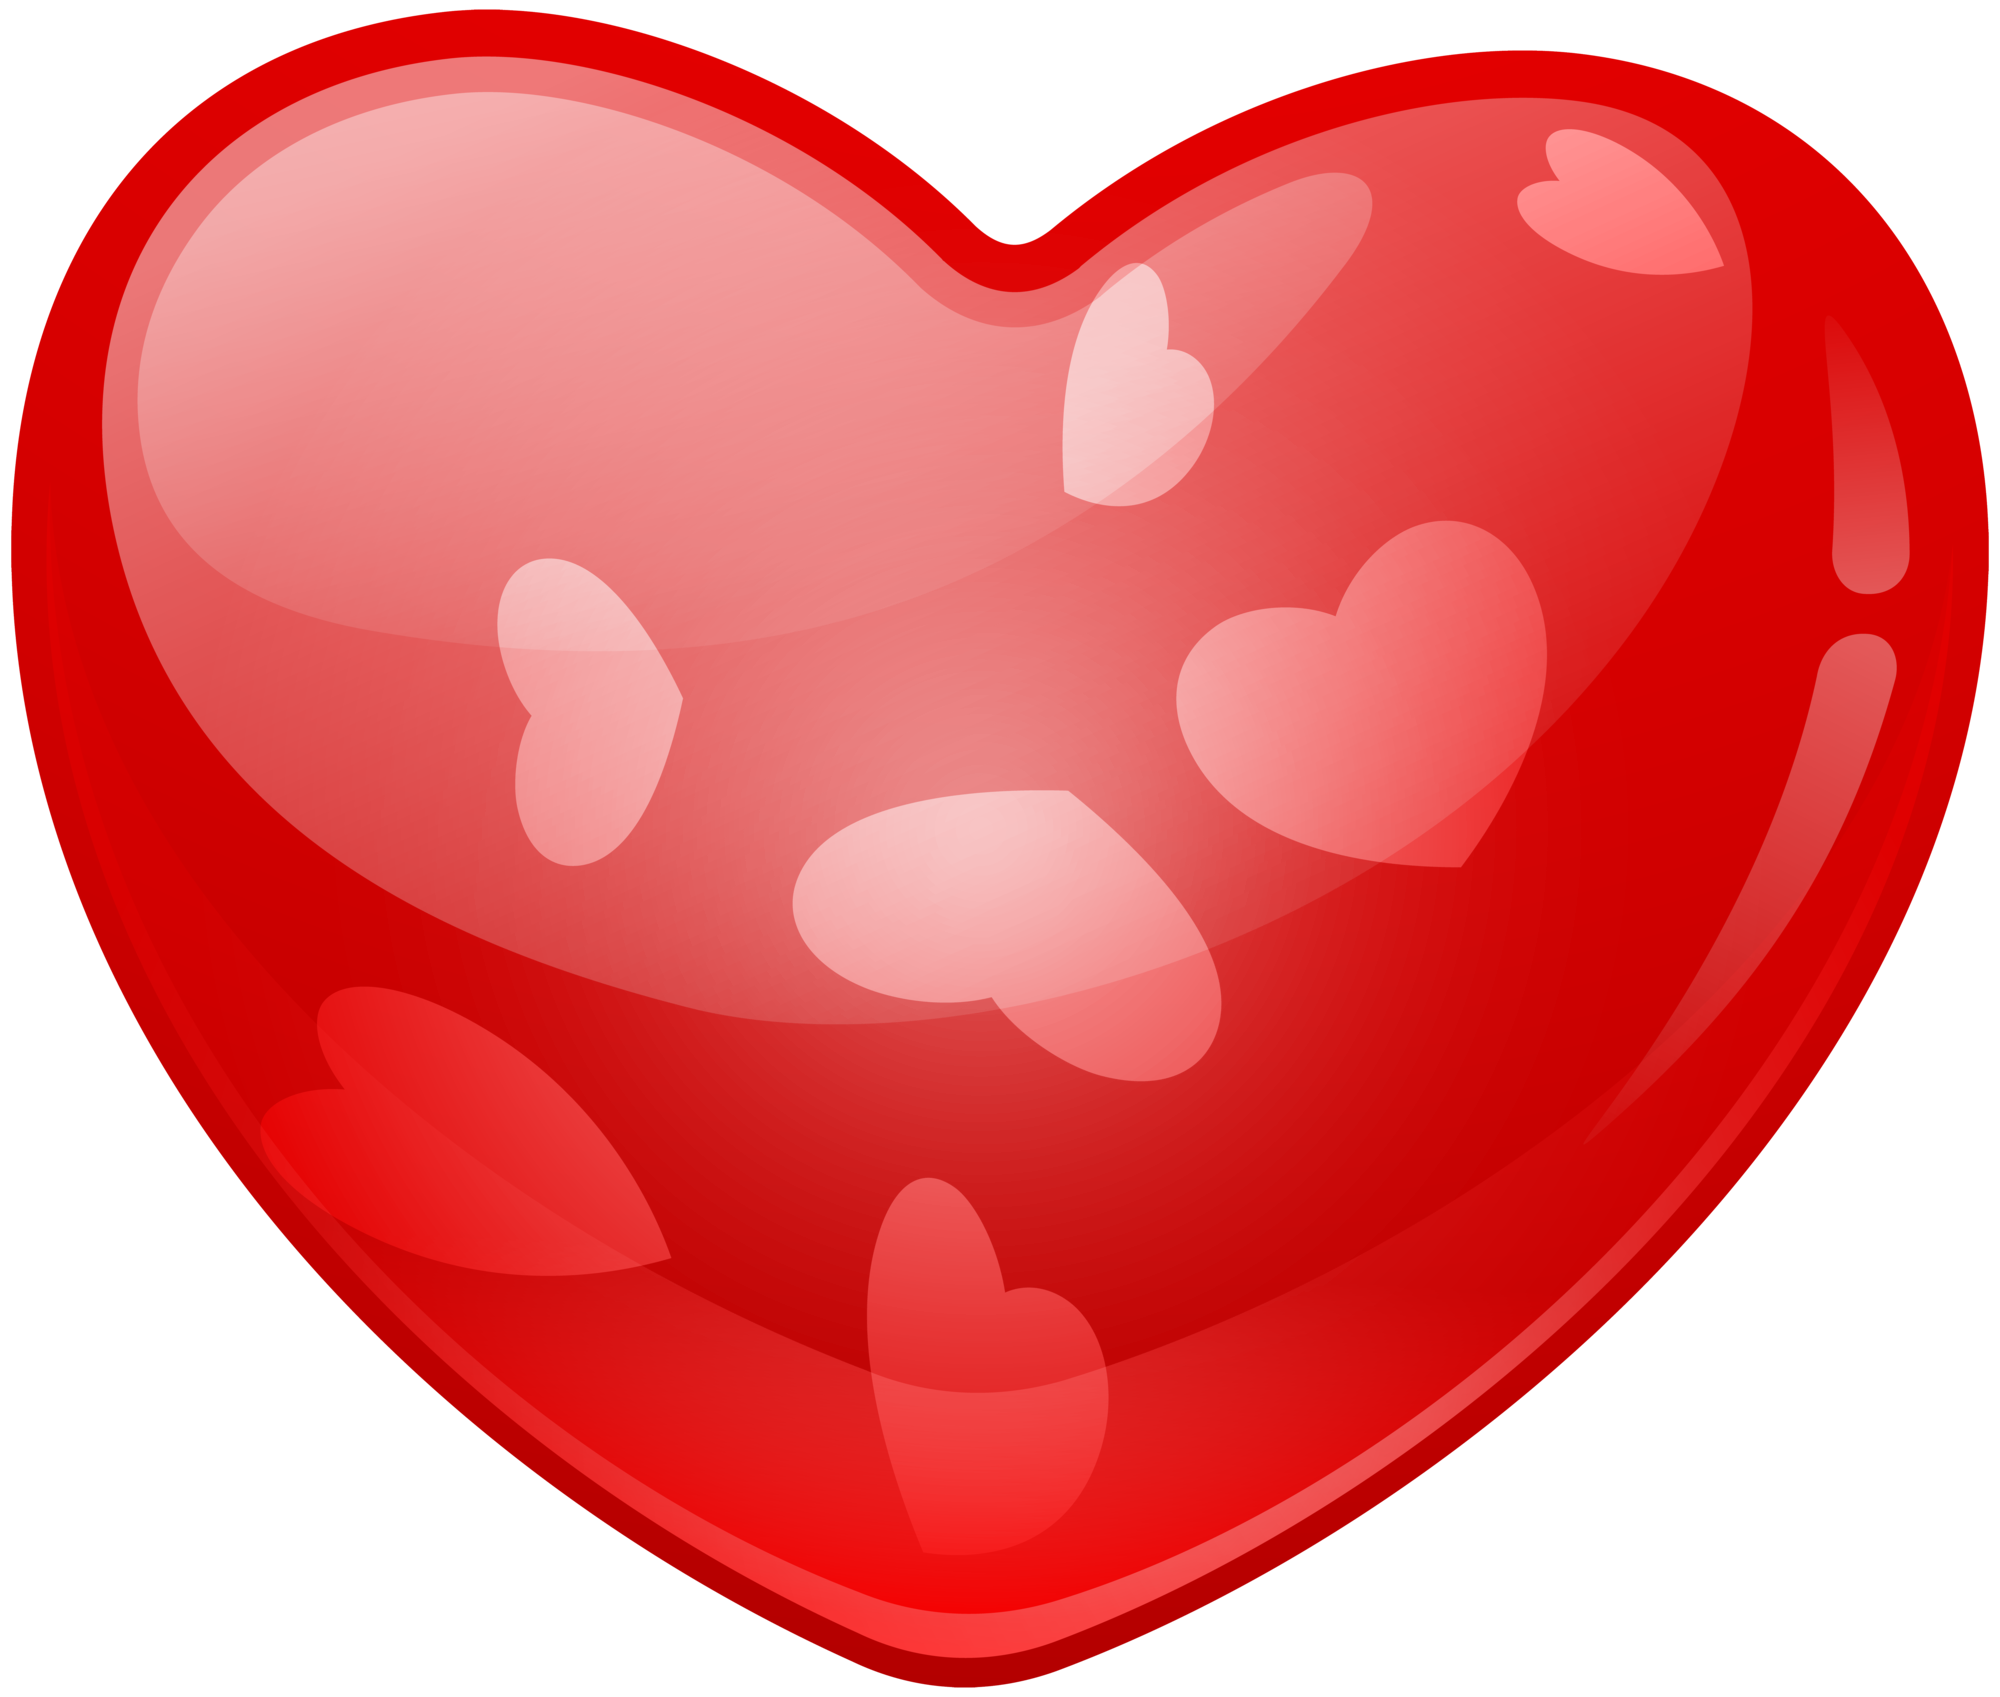 Heart With Hearts Png Clip Art Image